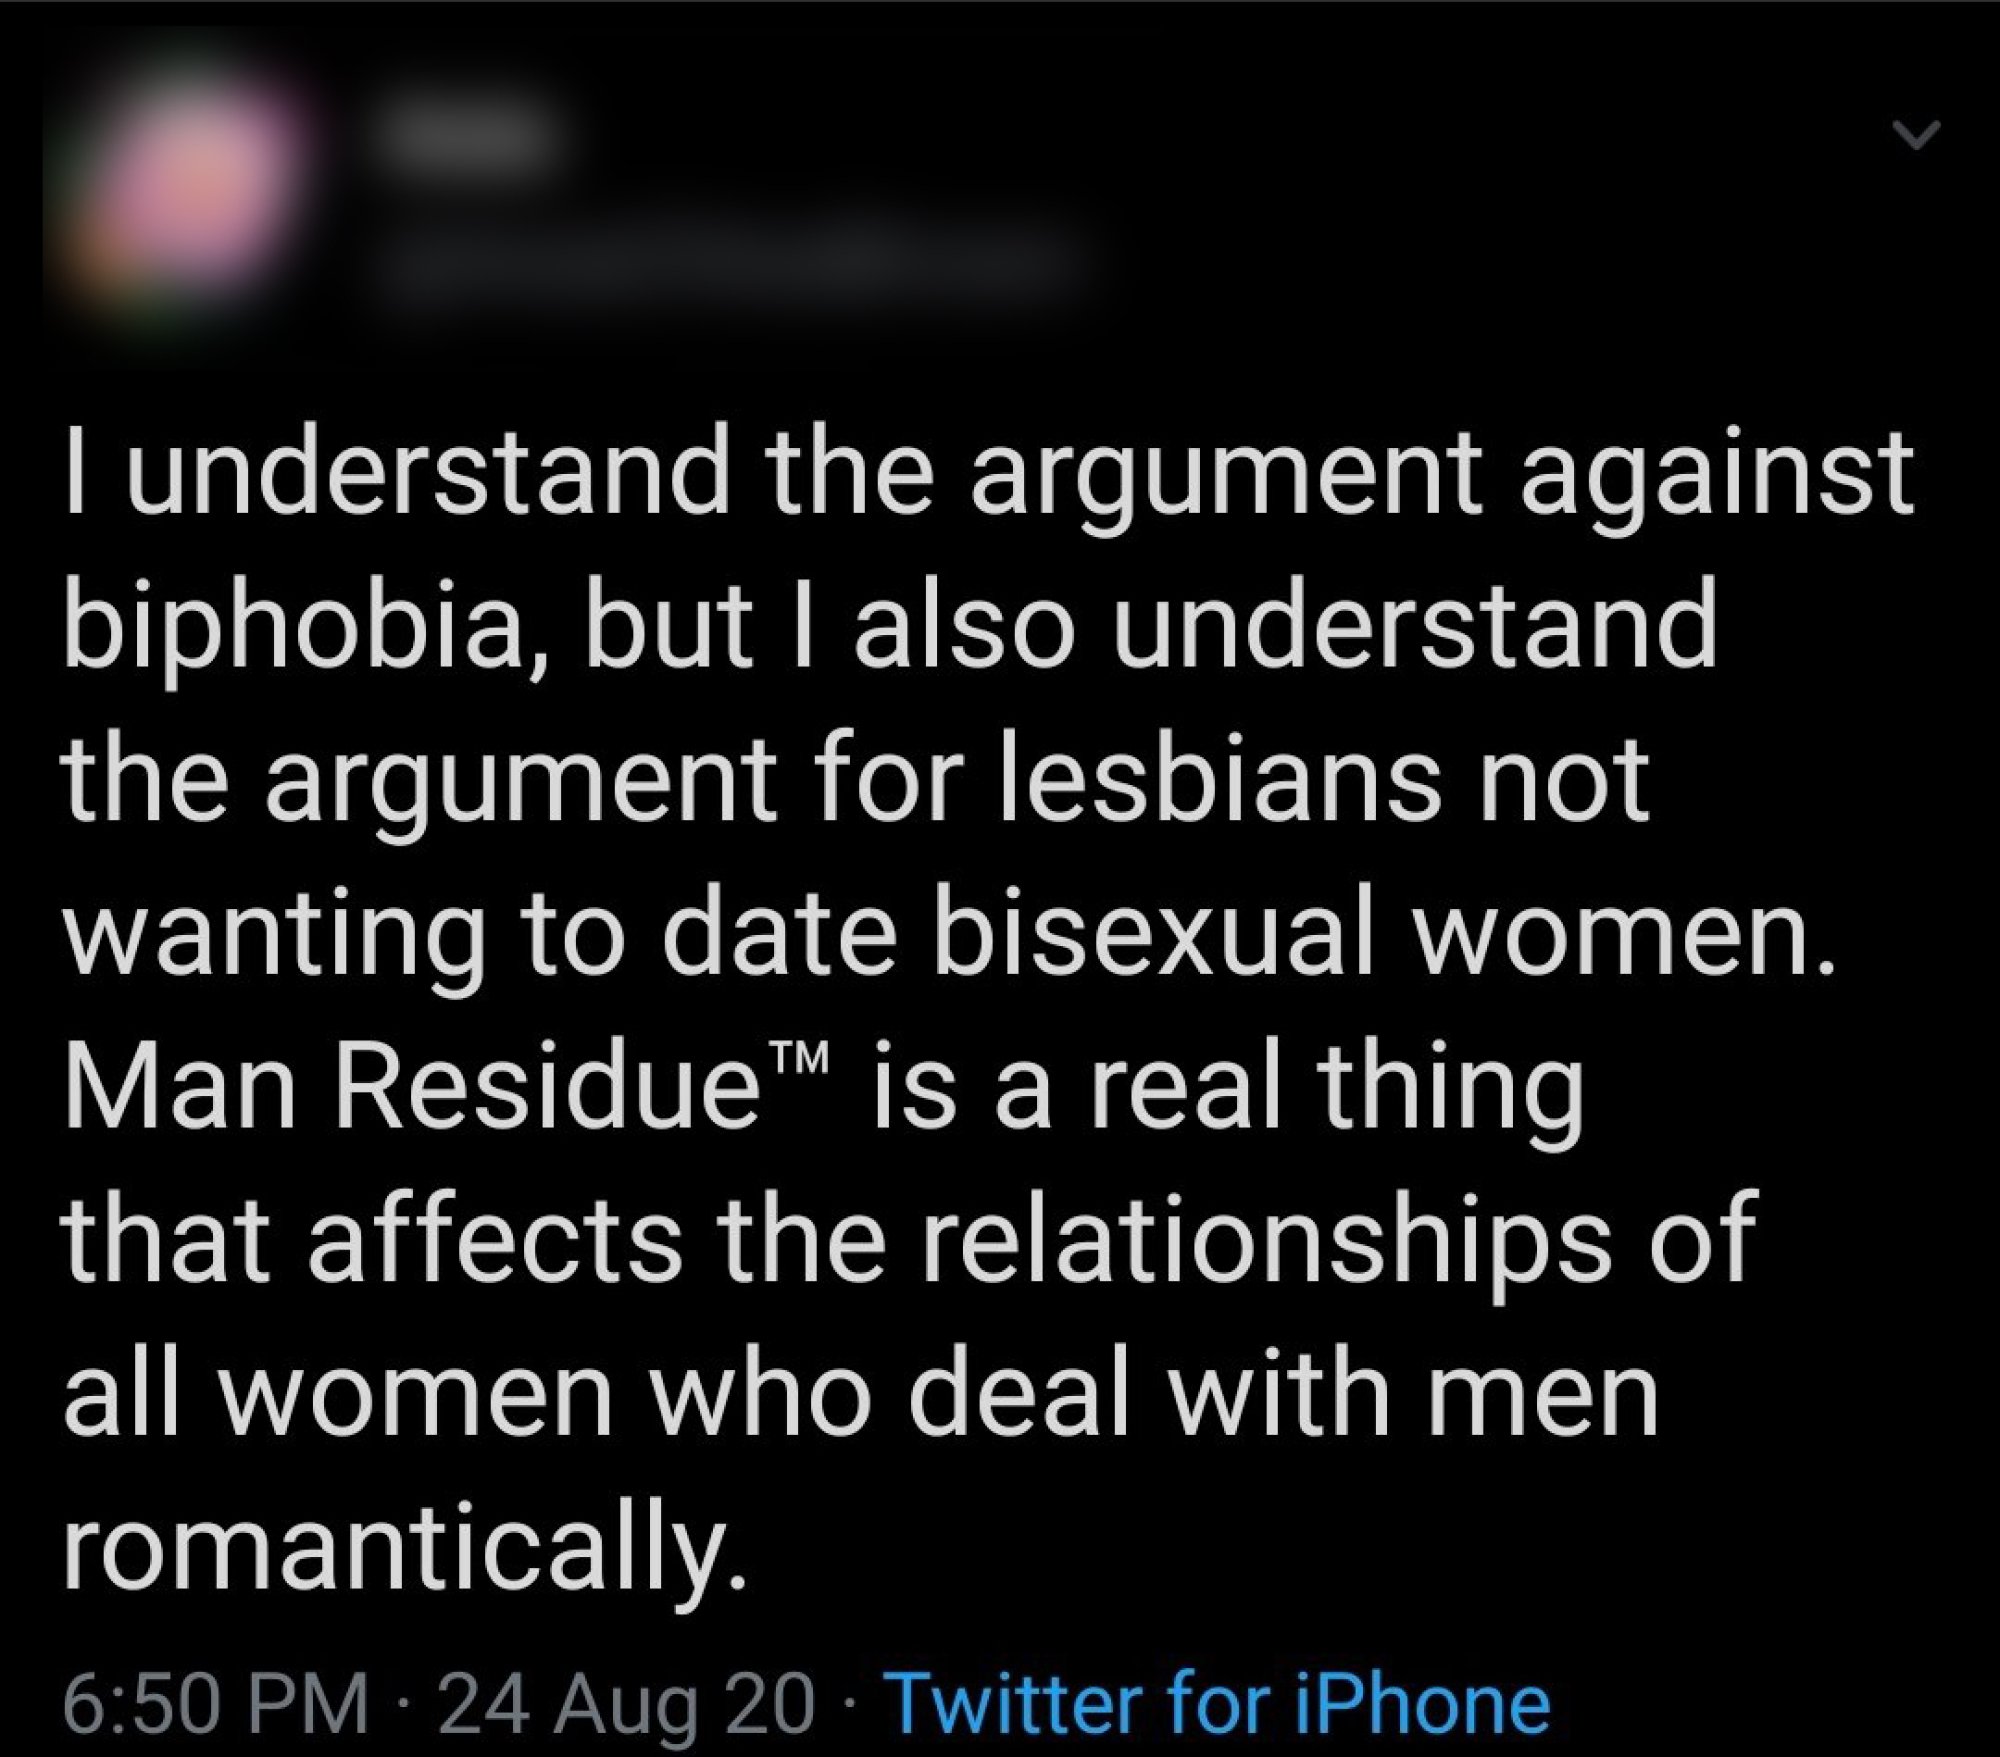 screenshot of tweet that reads: I understand the argument against biphobia, but I also understand the argument for lesbians not wanting to date bisexual women. Man Residue™ is a real thing that affects the relationships of all women who deal with men romantically.